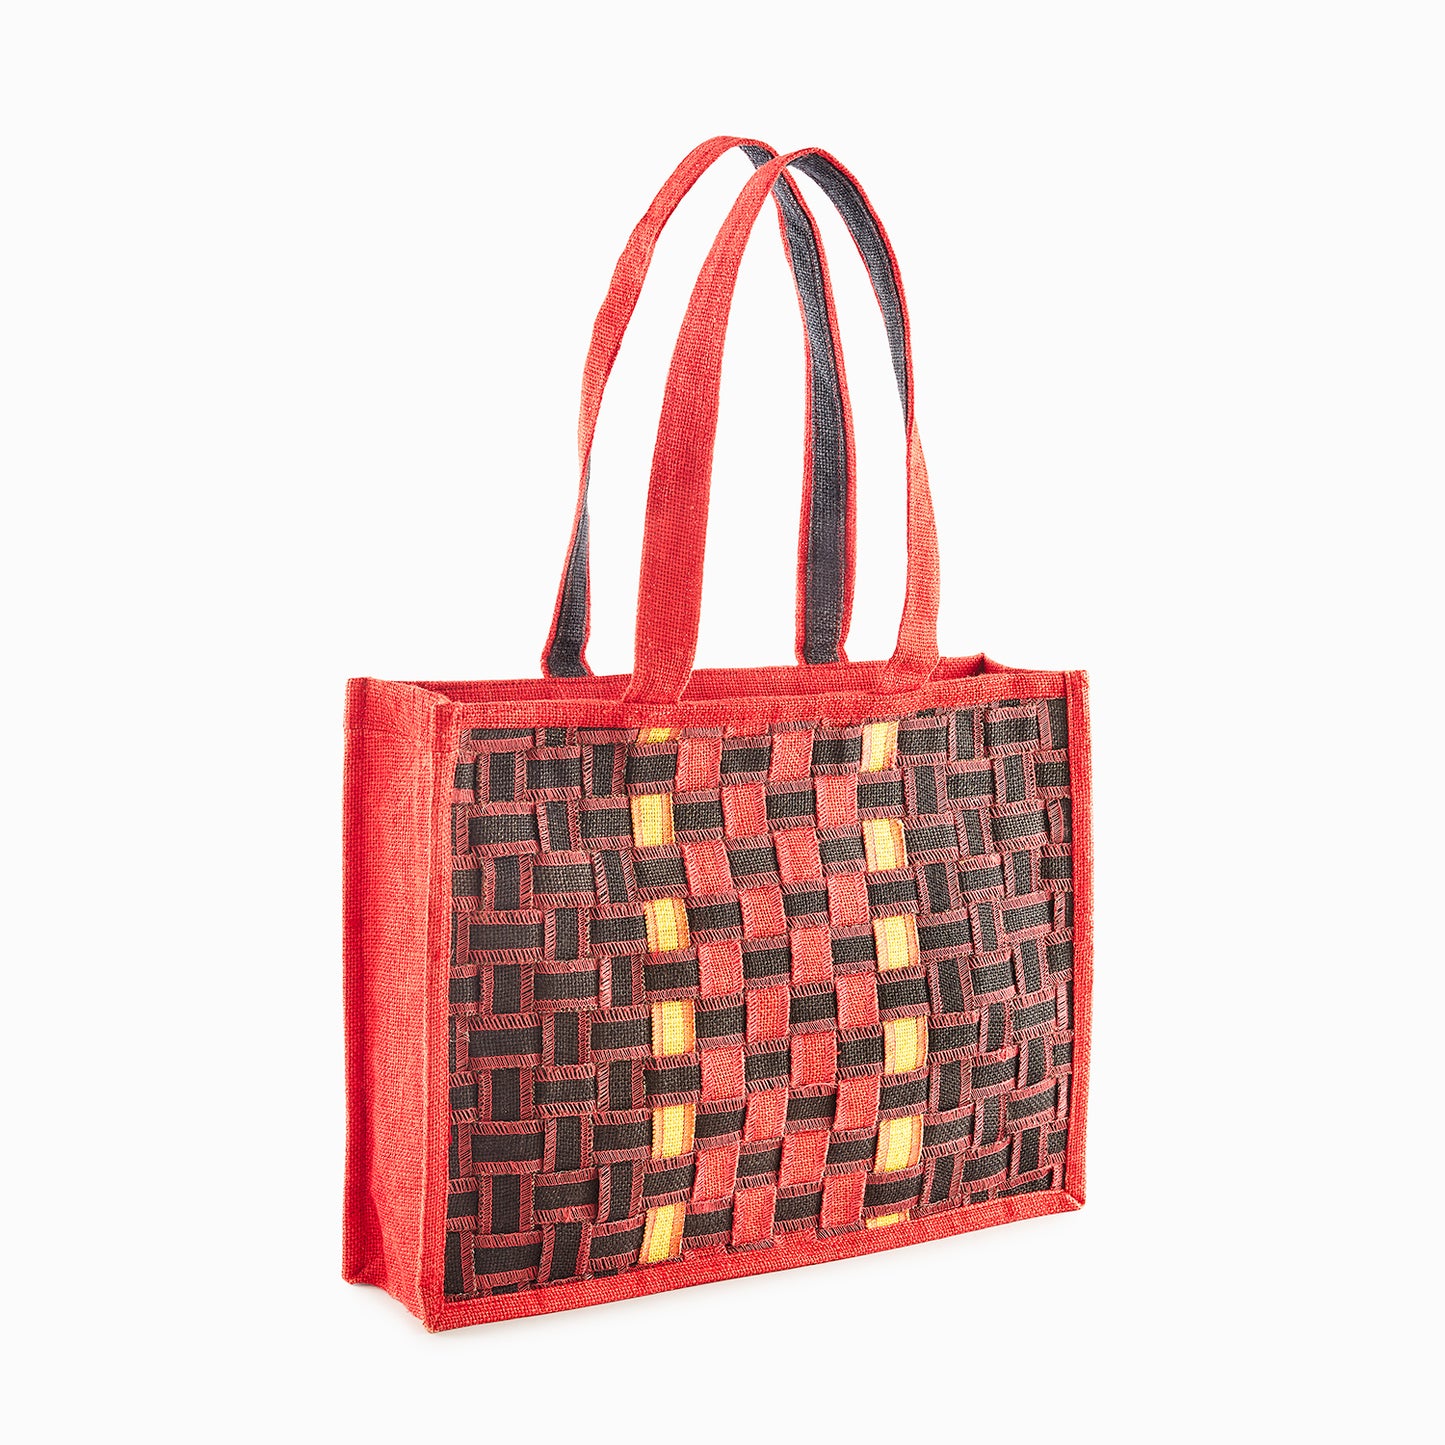 Black, Yellow and Red color Jute Bag; on - Super SALE!!!